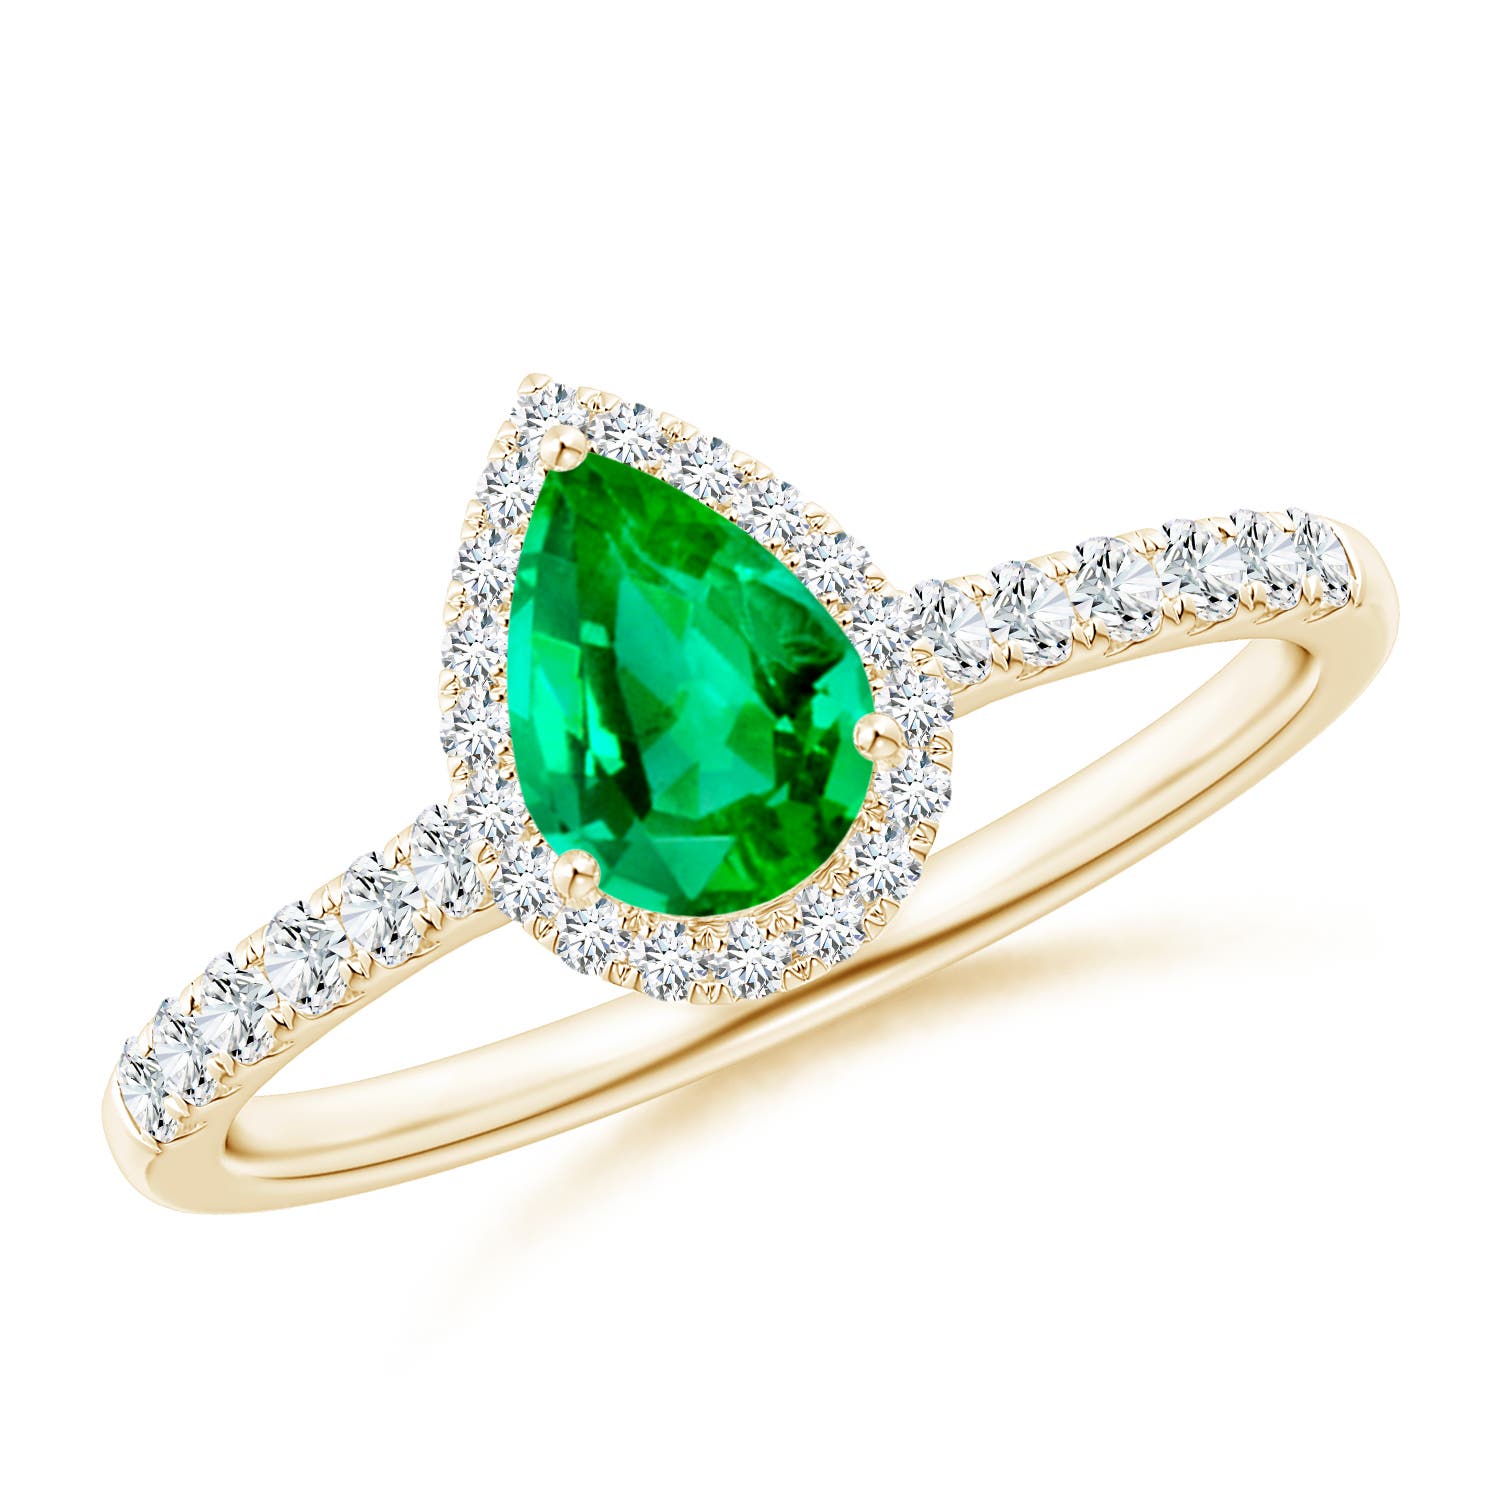 AAA - Emerald / 0.88 CT / 14 KT Yellow Gold